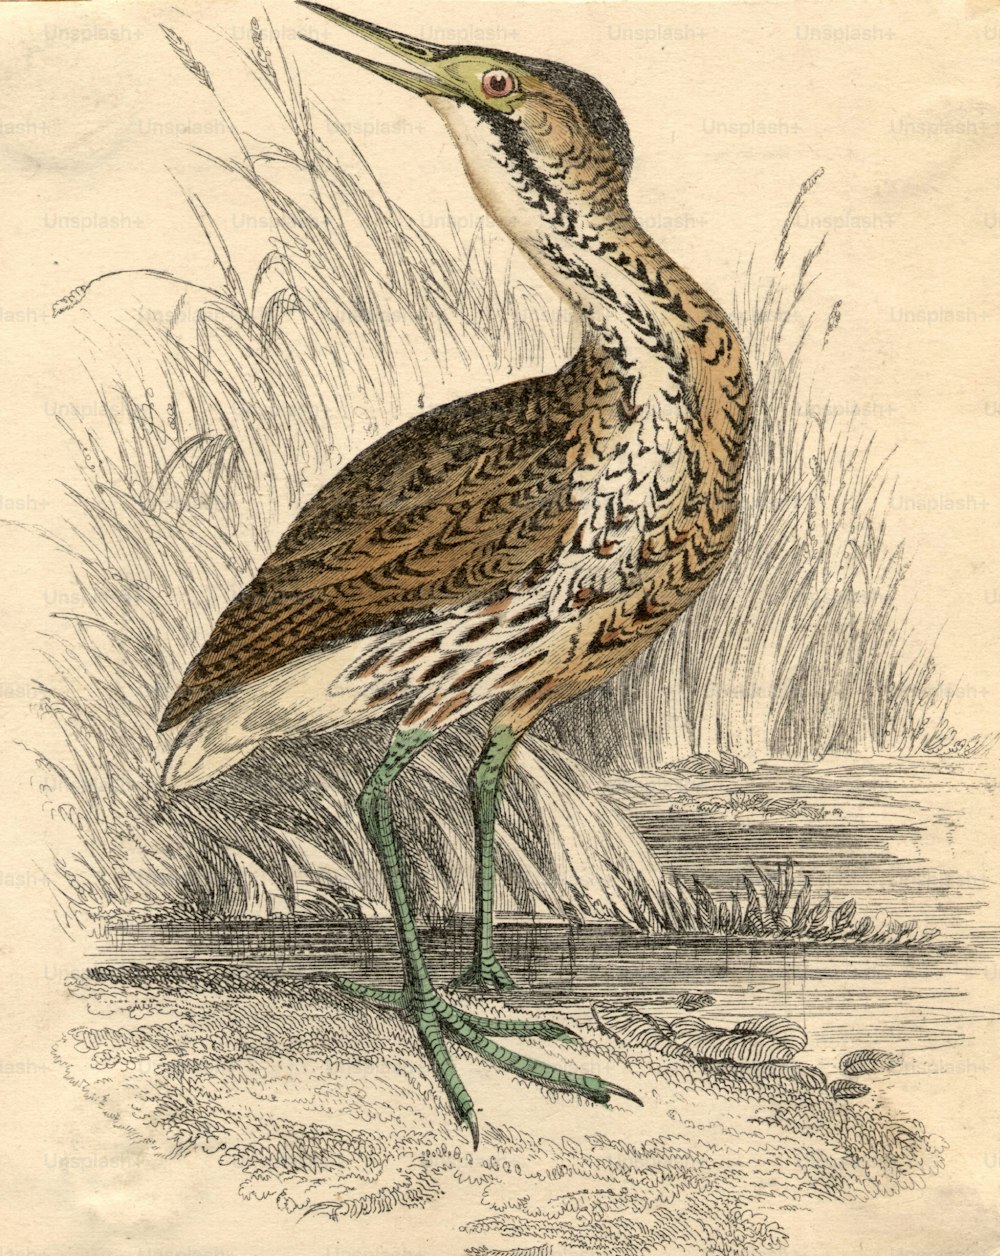 circa 1800:  A Bittern, a marsh bird of the heron family.  (Photo by Hulton Archive/Getty Images)